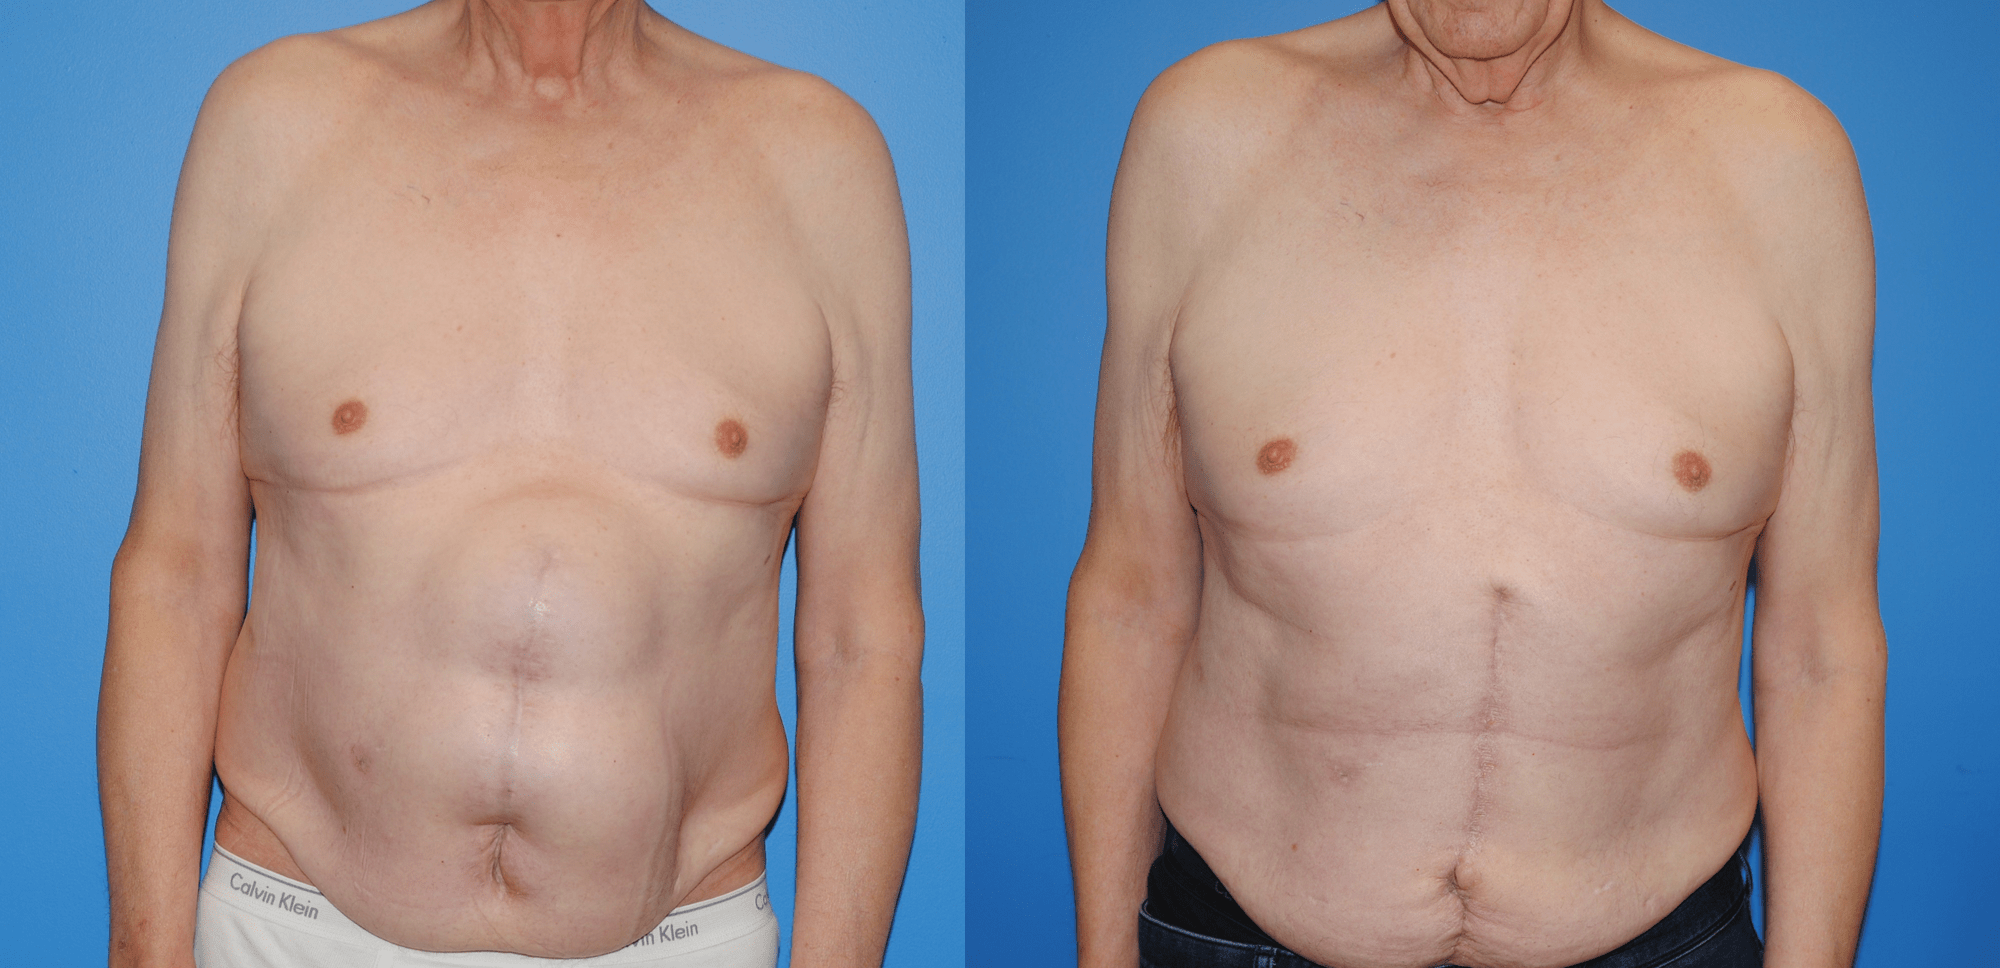 Hernia Repair and Abdominal Wall Reconstruction with Strattice Acellular Dermal Matrix